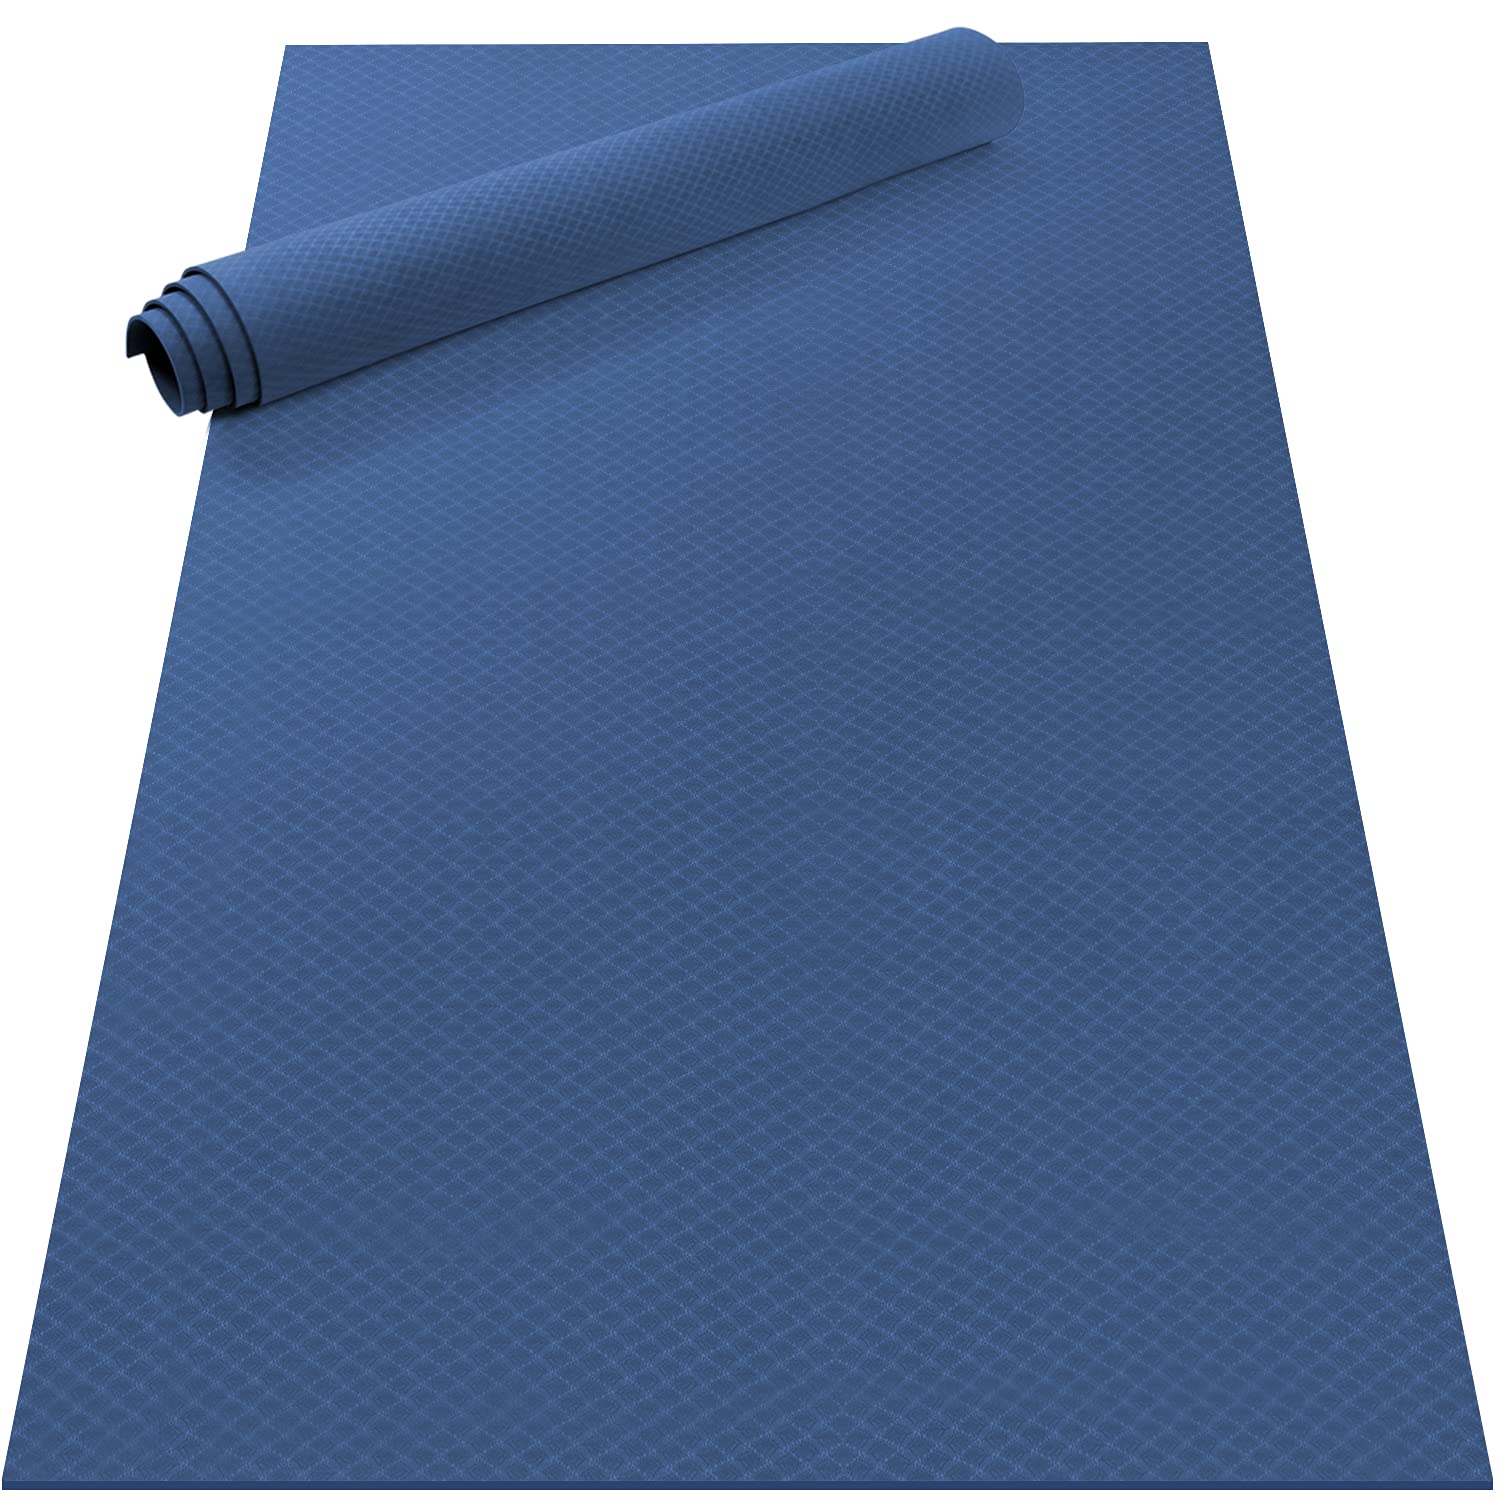 Odoland Large Yoga Mat for Pilates Stretching Home Gym Workout, Extra Thick Non Slip Exercise Mat, Extra Wide Fitness Mat for Men and Women, Mutil-size x 1/4'' Thick